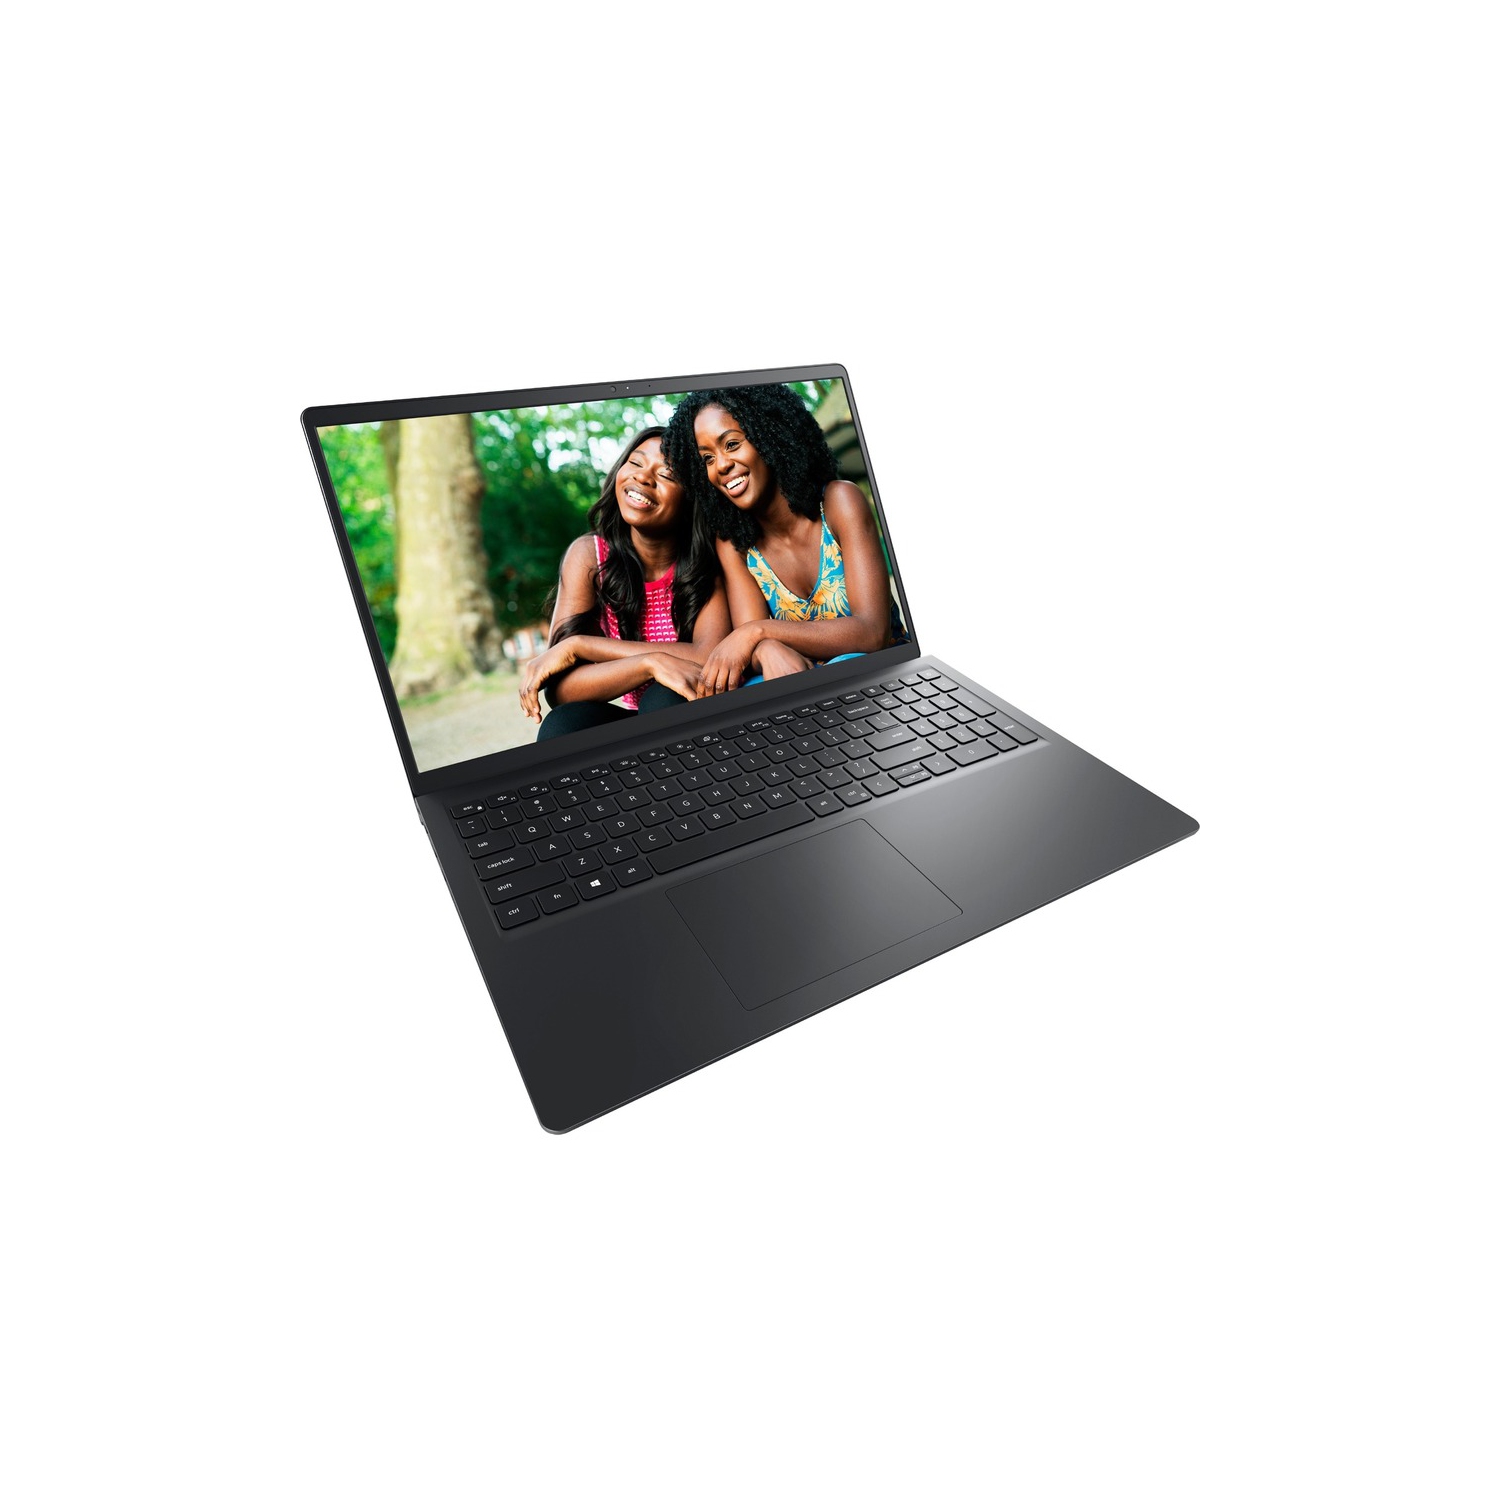 Refurbished (Excellent) - Dell Inspiron 15 3525 15.6" Touchscreen Notebook AMD 7 5825U 16 GB DDR4 512 GB NVMe M.2 PCI Express Windows 11 Home 64-Bit